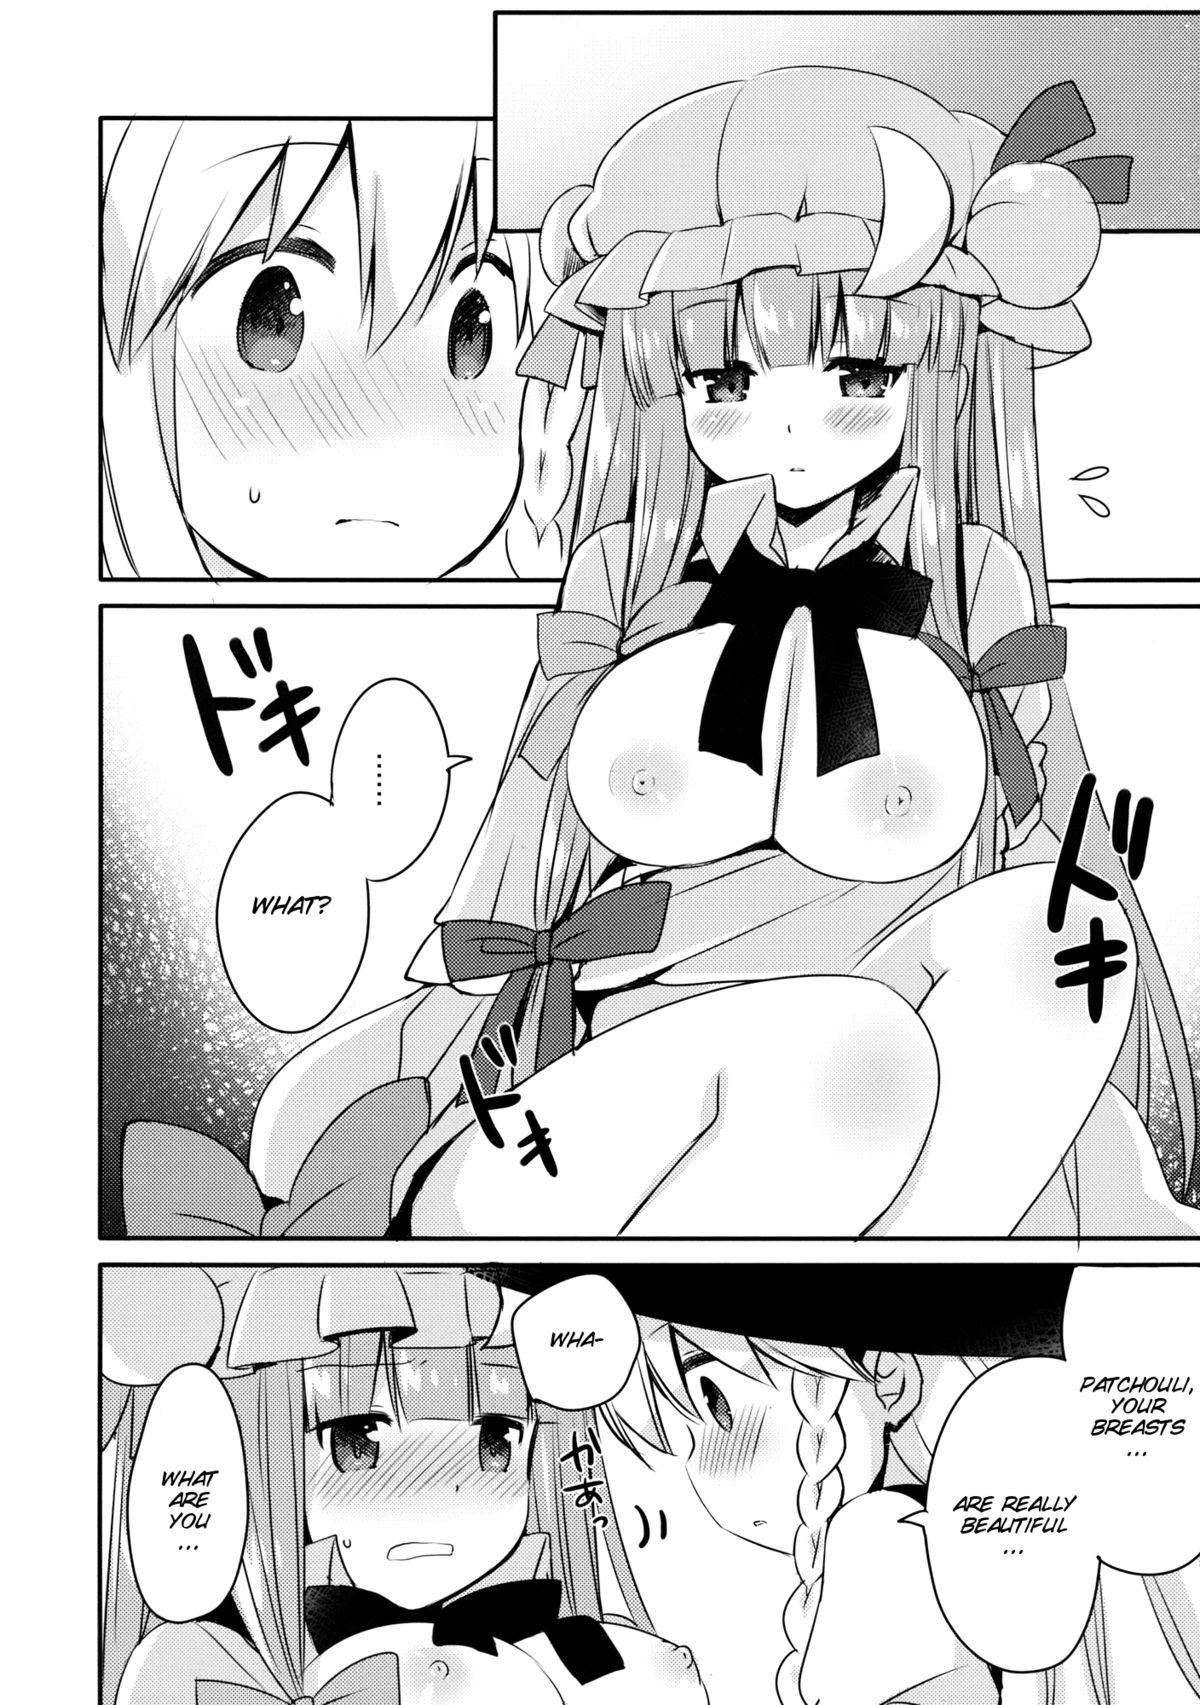 Family Roleplay Lovely - Touhou project Reversecowgirl - Page 10